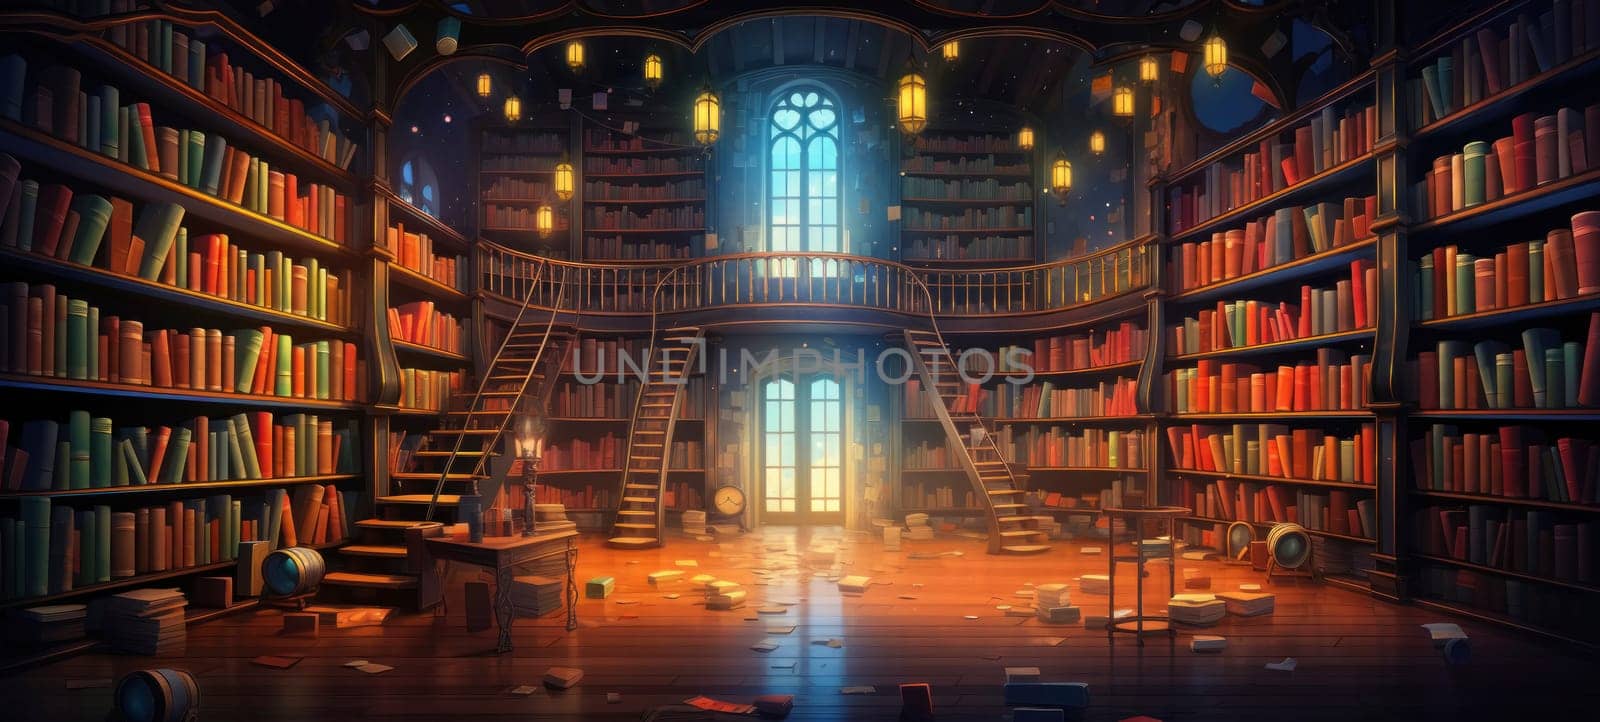 Enchanted Library Room with Glowing Lanterns by andreyz